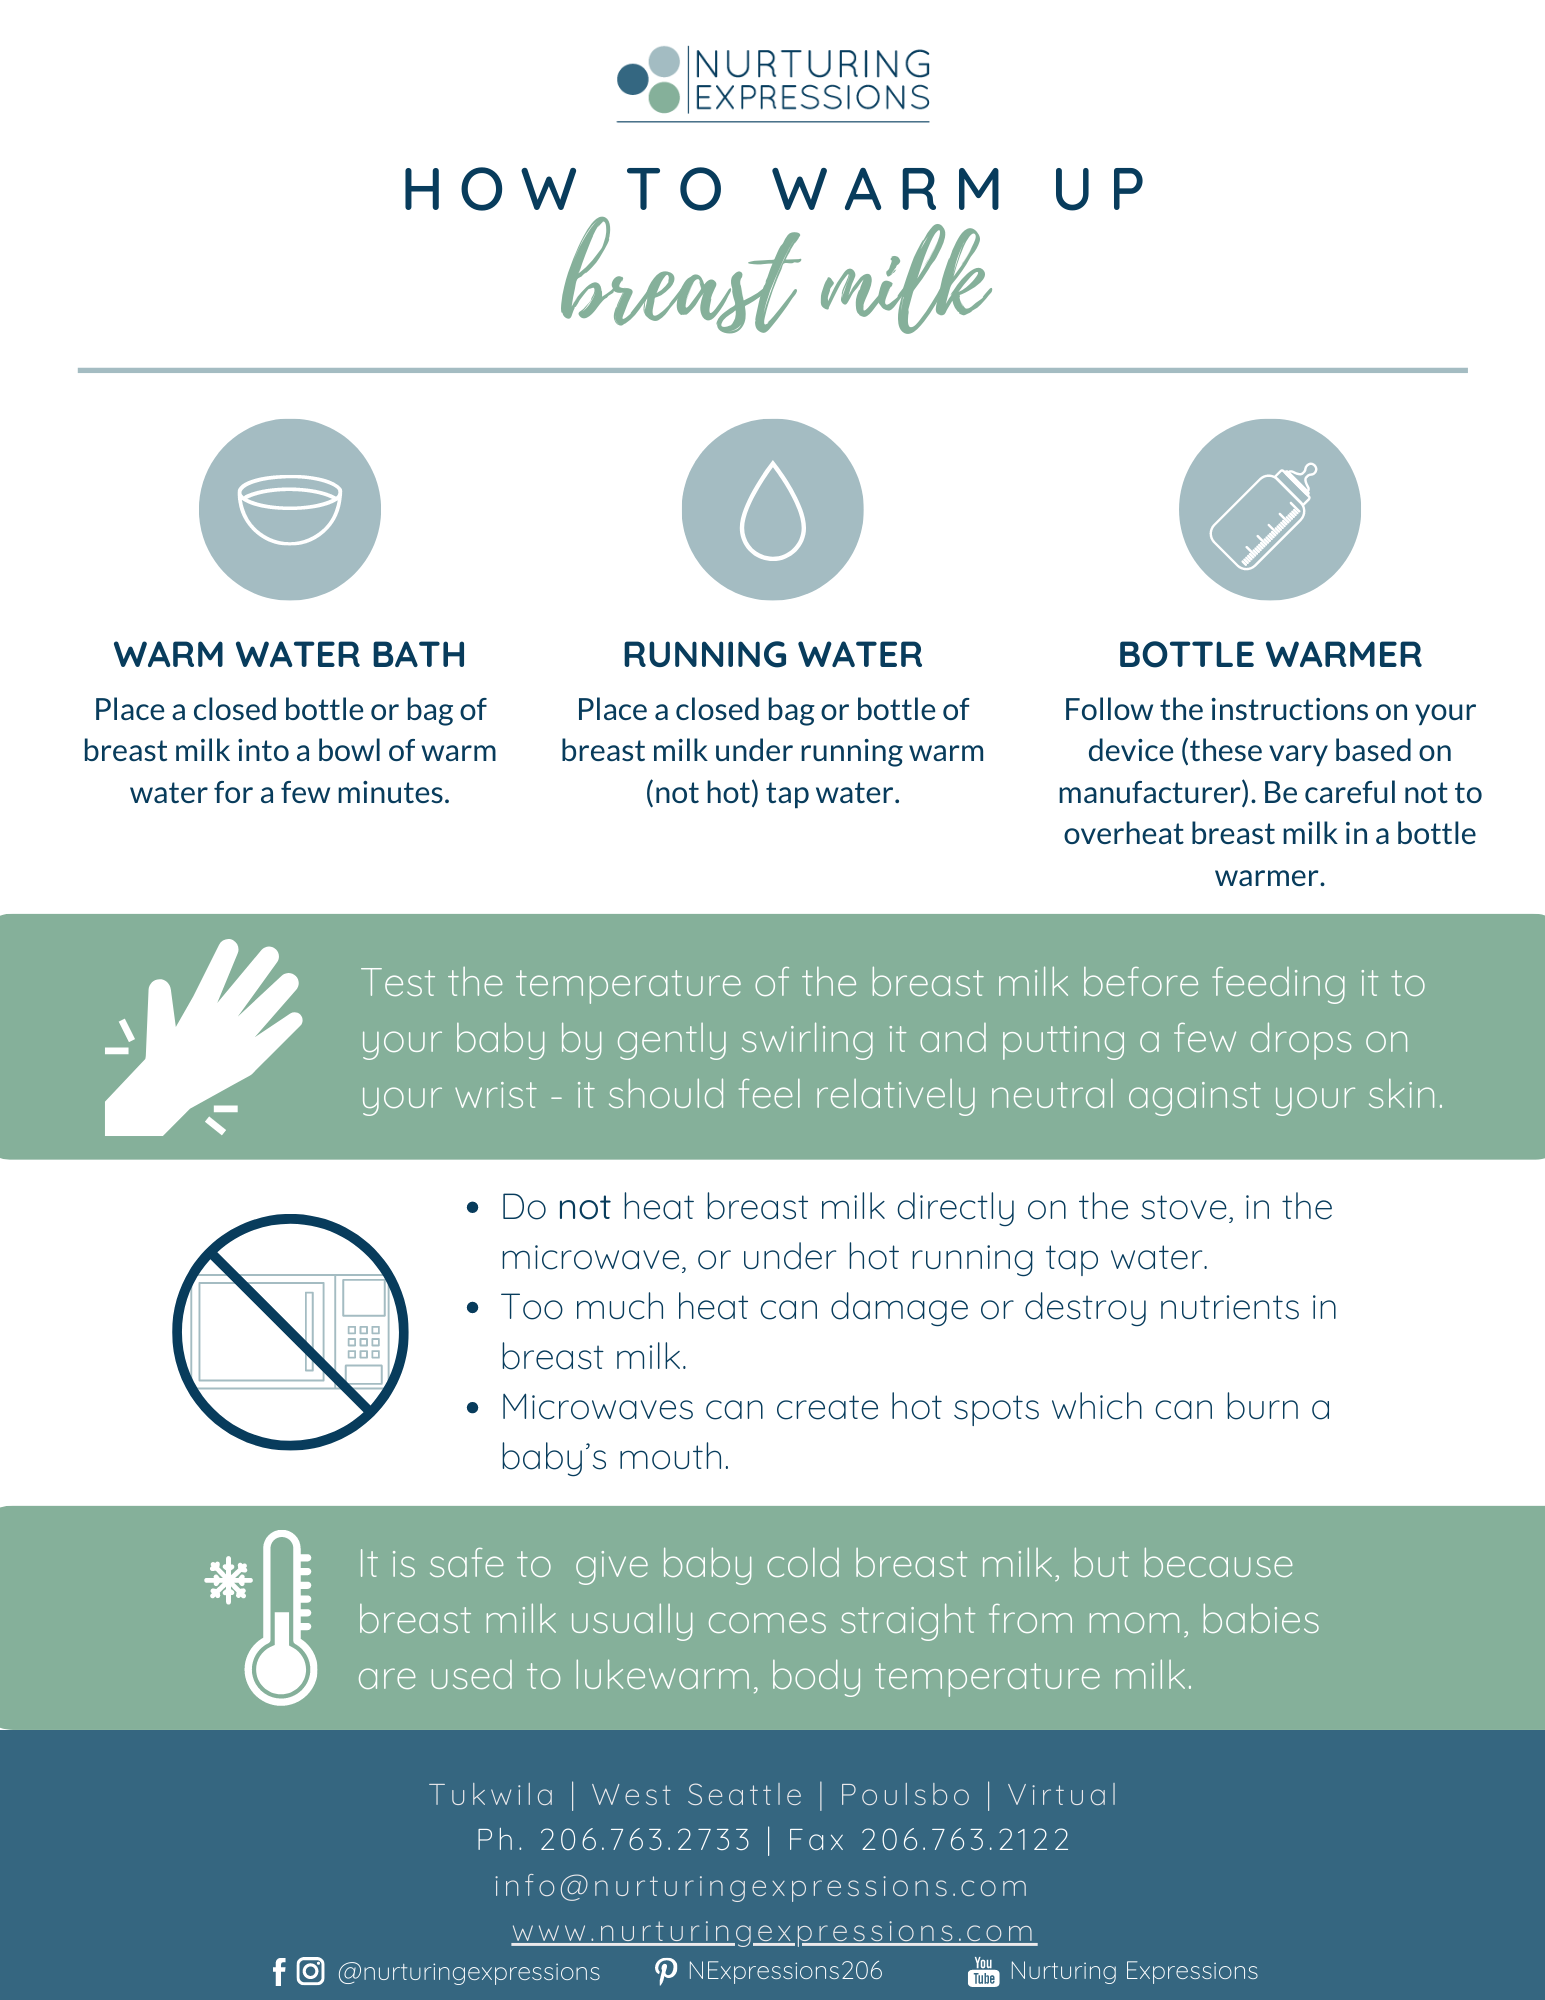 How to warm up expressed breast milk when you're out – One Eco Step